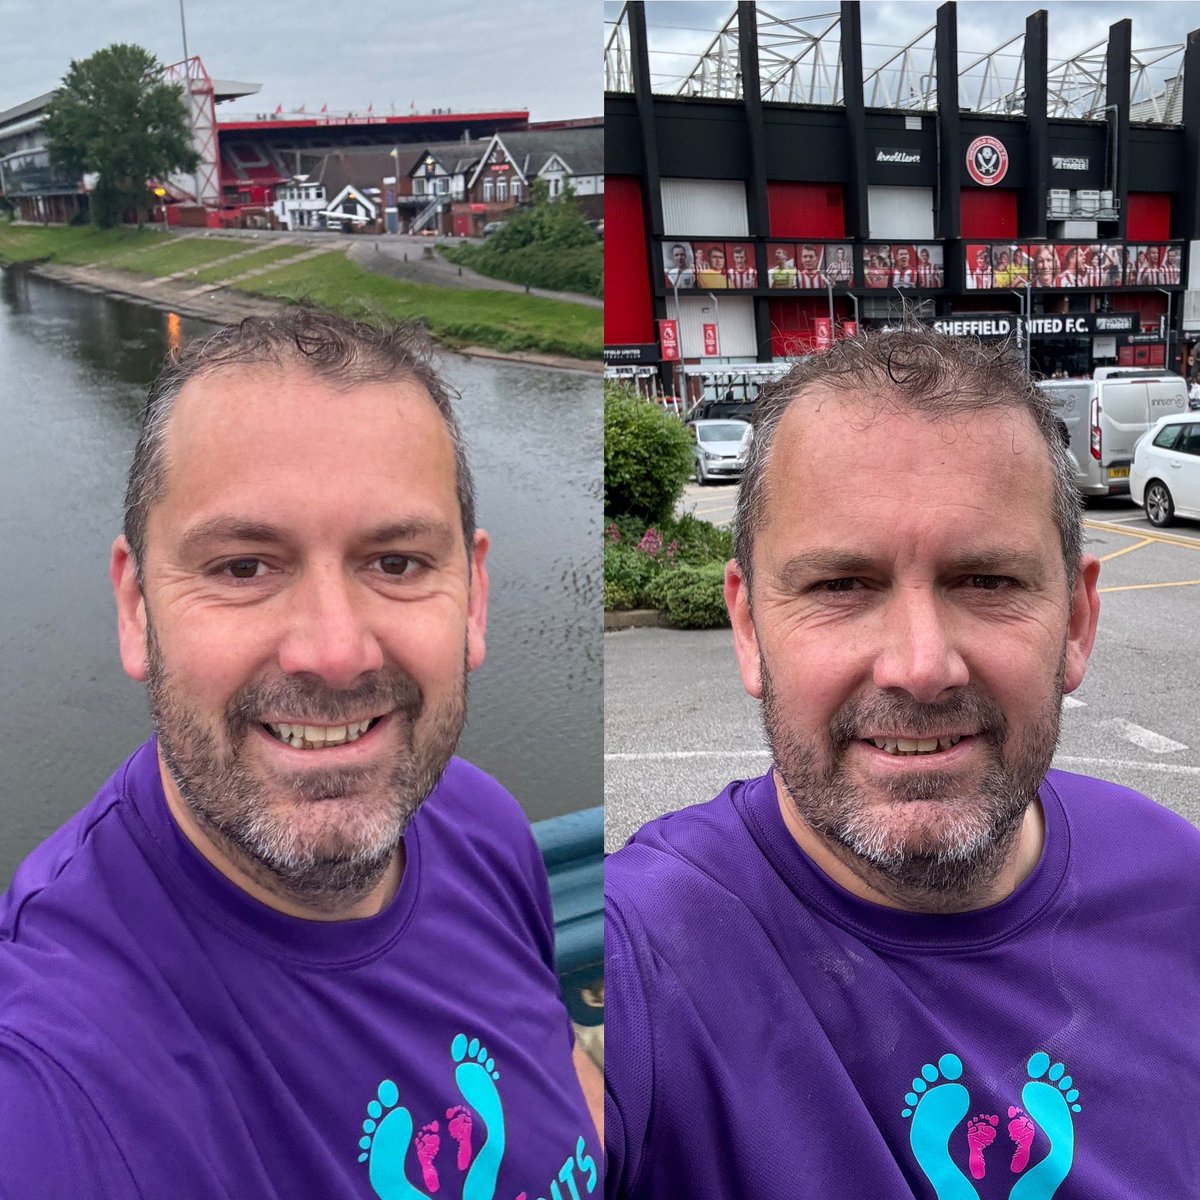 Today, I ran from the WFCG to Bramall Lane, it came out at nearly 41 miles 😳

One step in front of another, digging deep into new levels of determination, I’m so proud of what I have achieved! 

And, #nffc got the W 🙌

I’m sorry, I’m happy… I so grateful for so much support ❤️